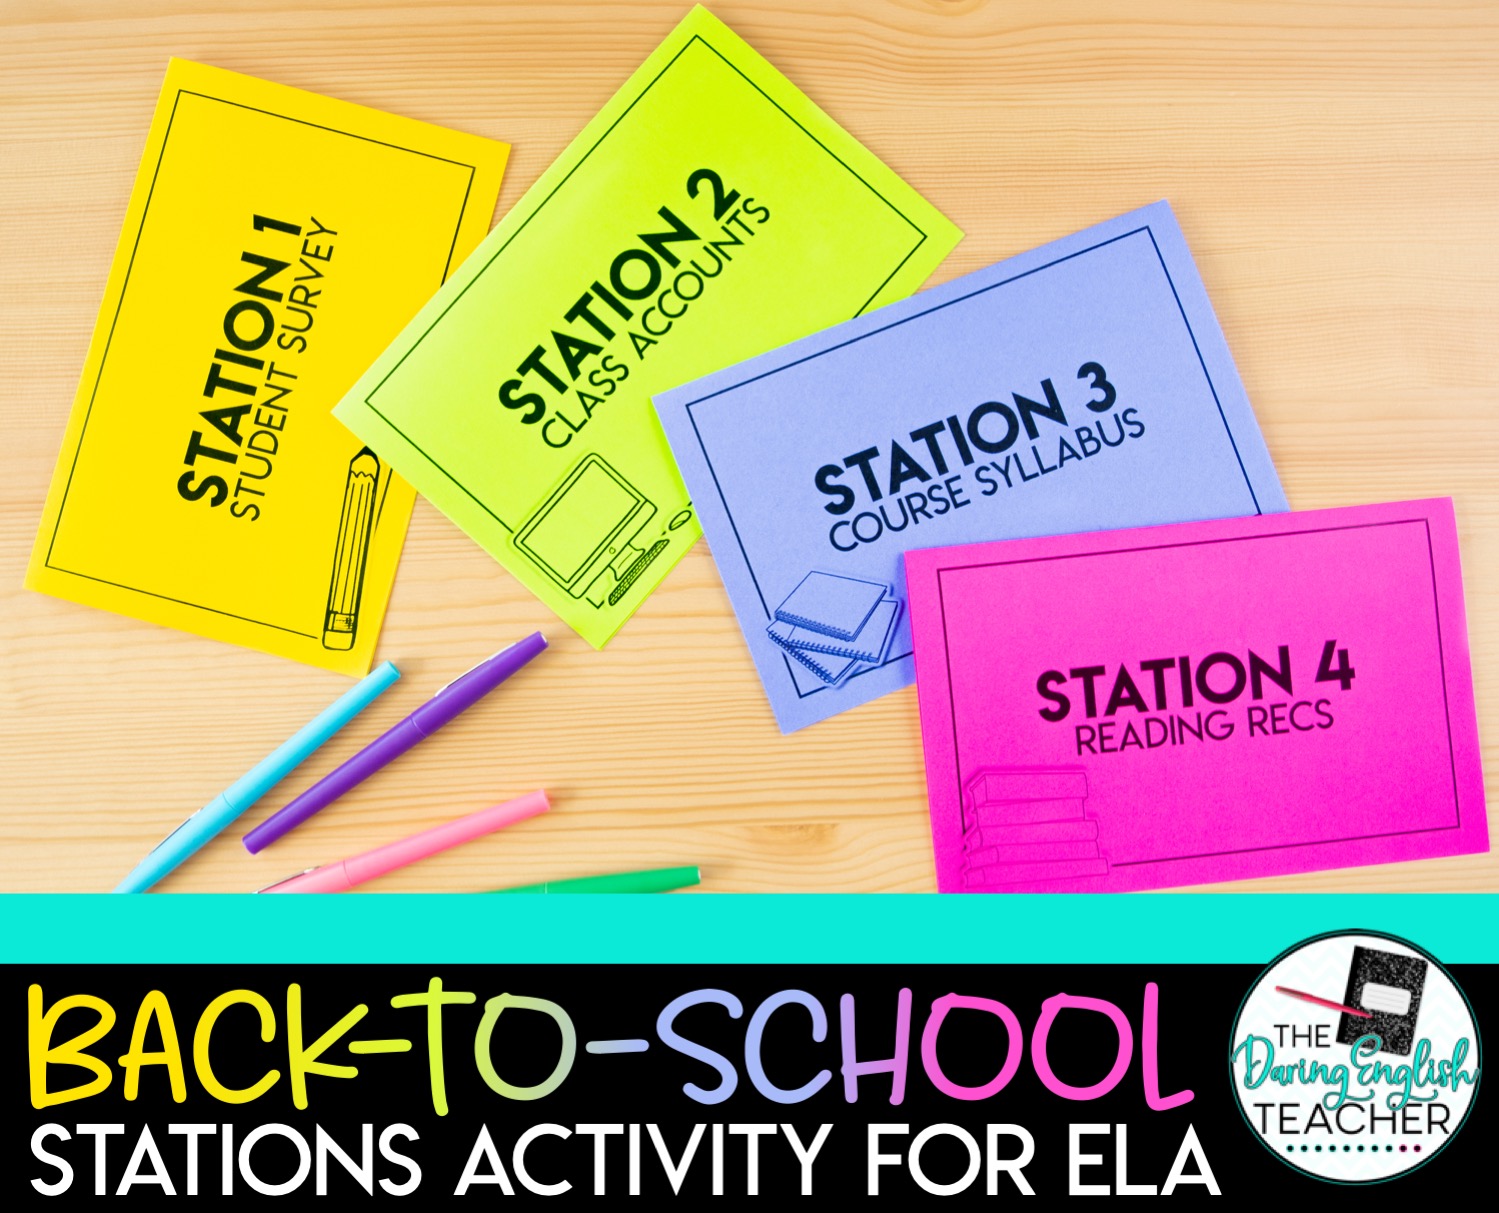 Back-to-School Stations for Secondary ELA: How I Use Stations in My High School Classroom